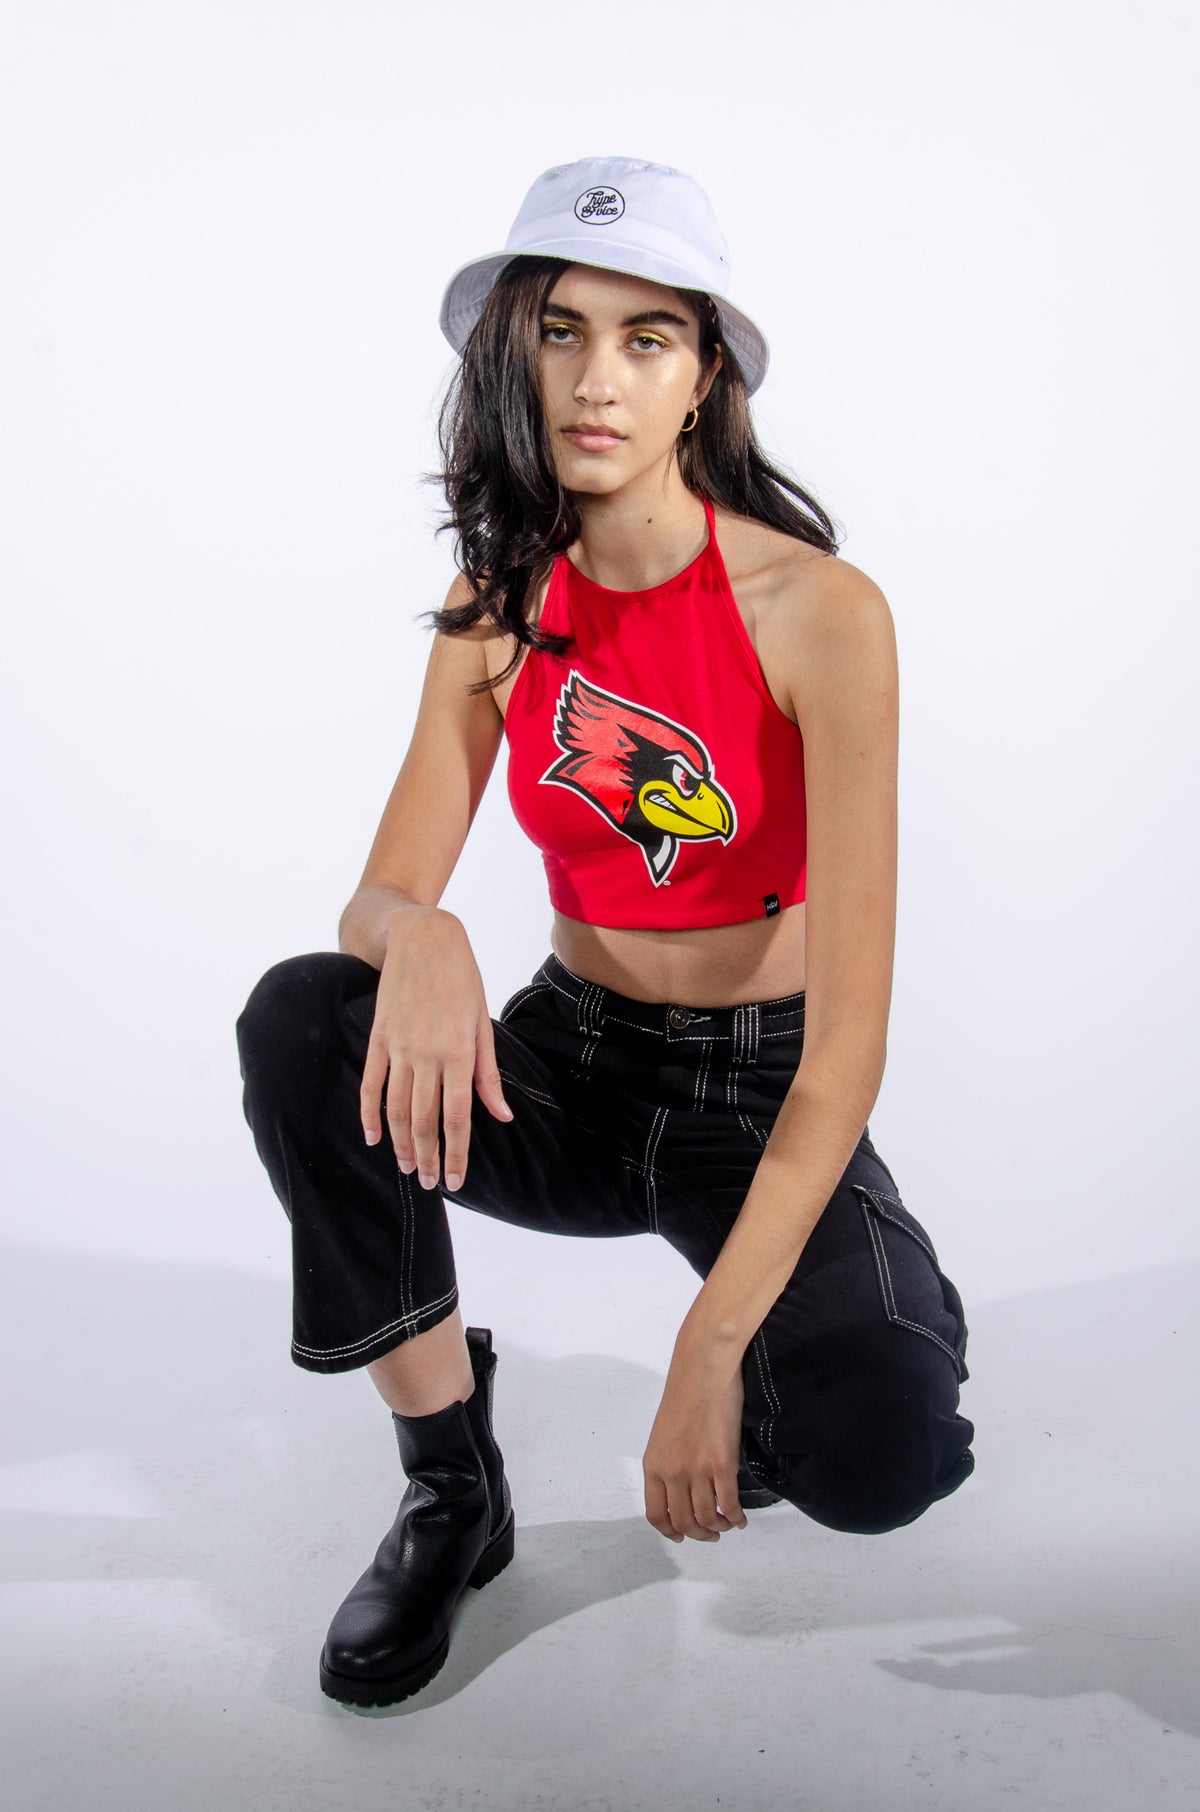 Illinois State Halter Top - Hype and Vice